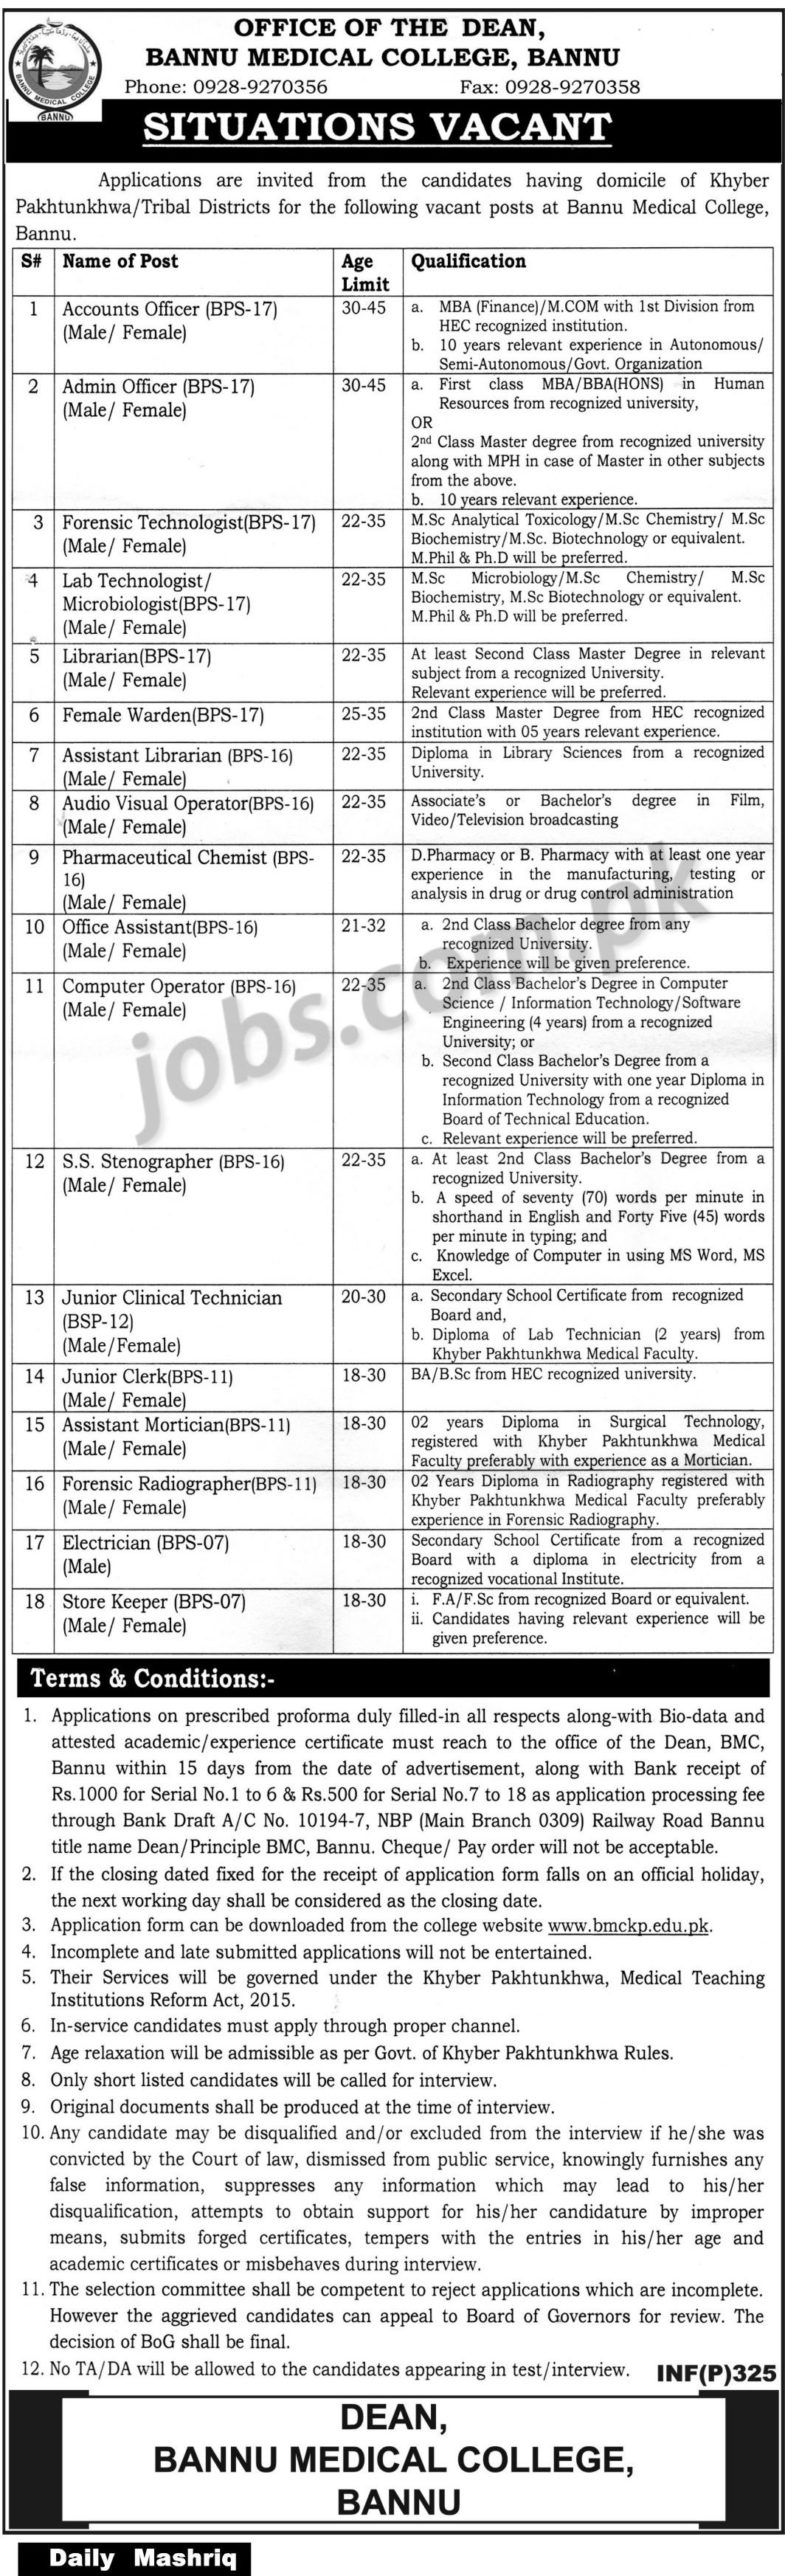 Bannu Medical College Jobs 2019 for Admin, Accounts, Librarian, Lab, Pharma, Jr Clerk, Stenographer, IT & Other Staff Posts